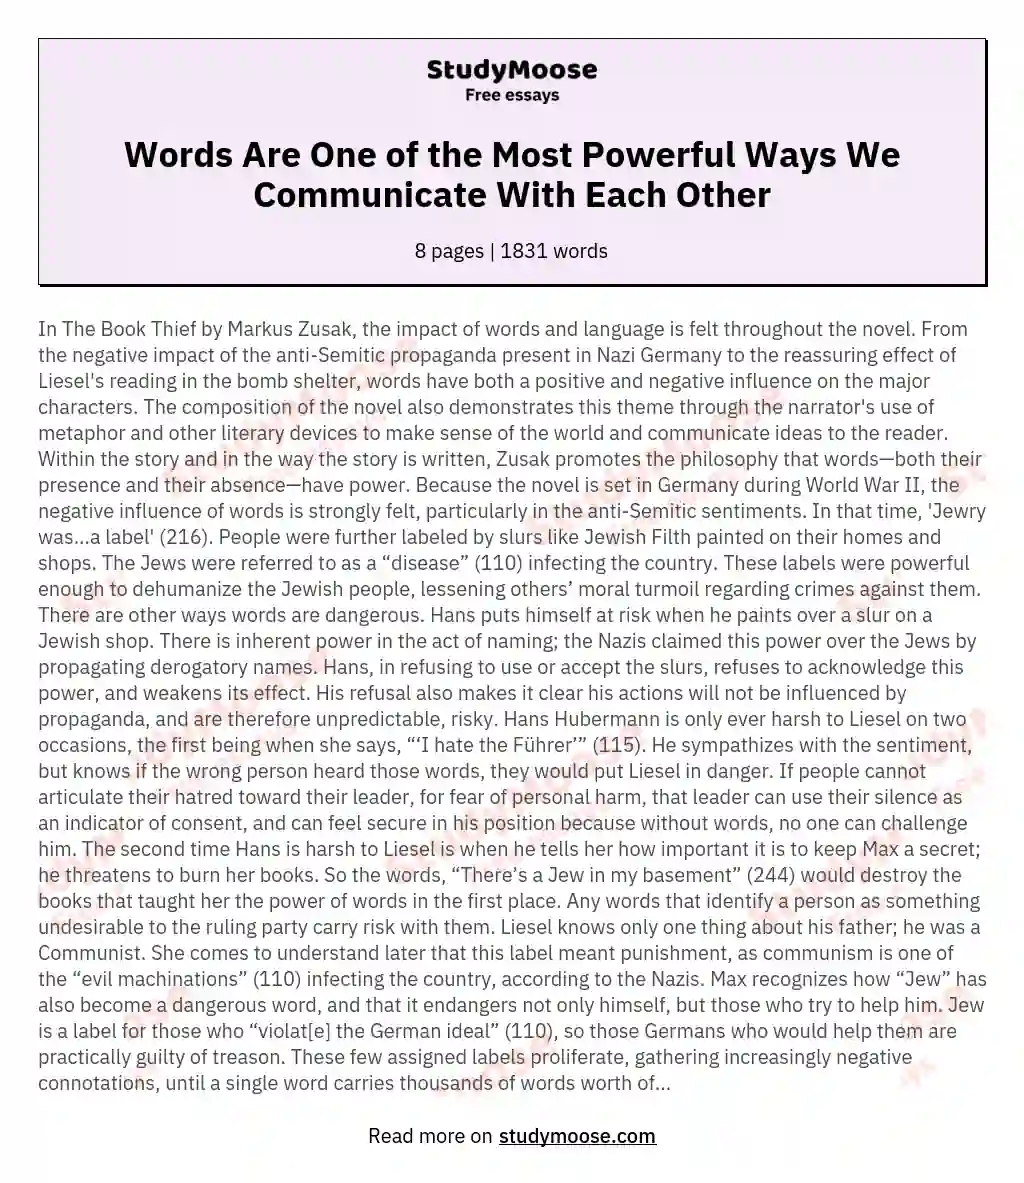 Words Are One of the Most Powerful Ways We Communicate With Each Other essay